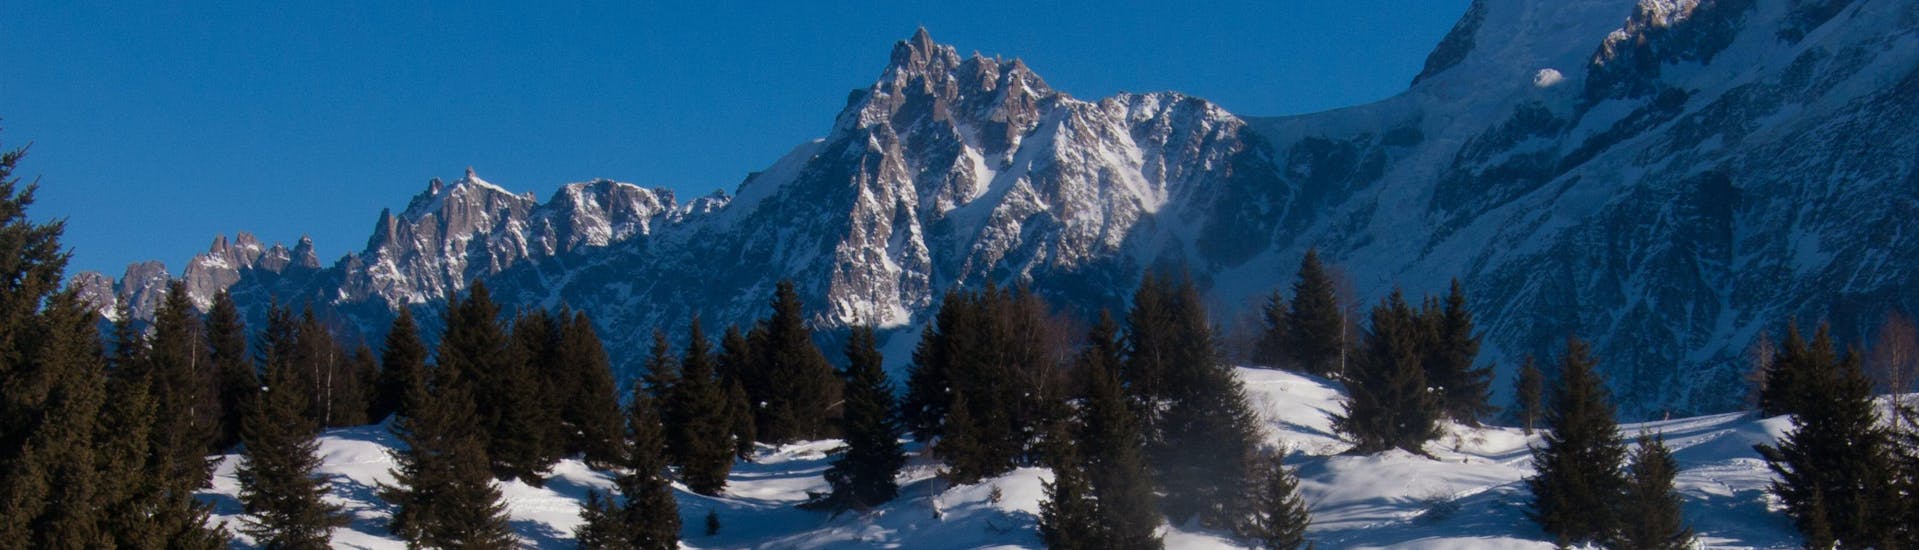 Panoramic views of the of the greenery and snow-capped mountains of vallorcine where the ski schools conduct skiing lessons.